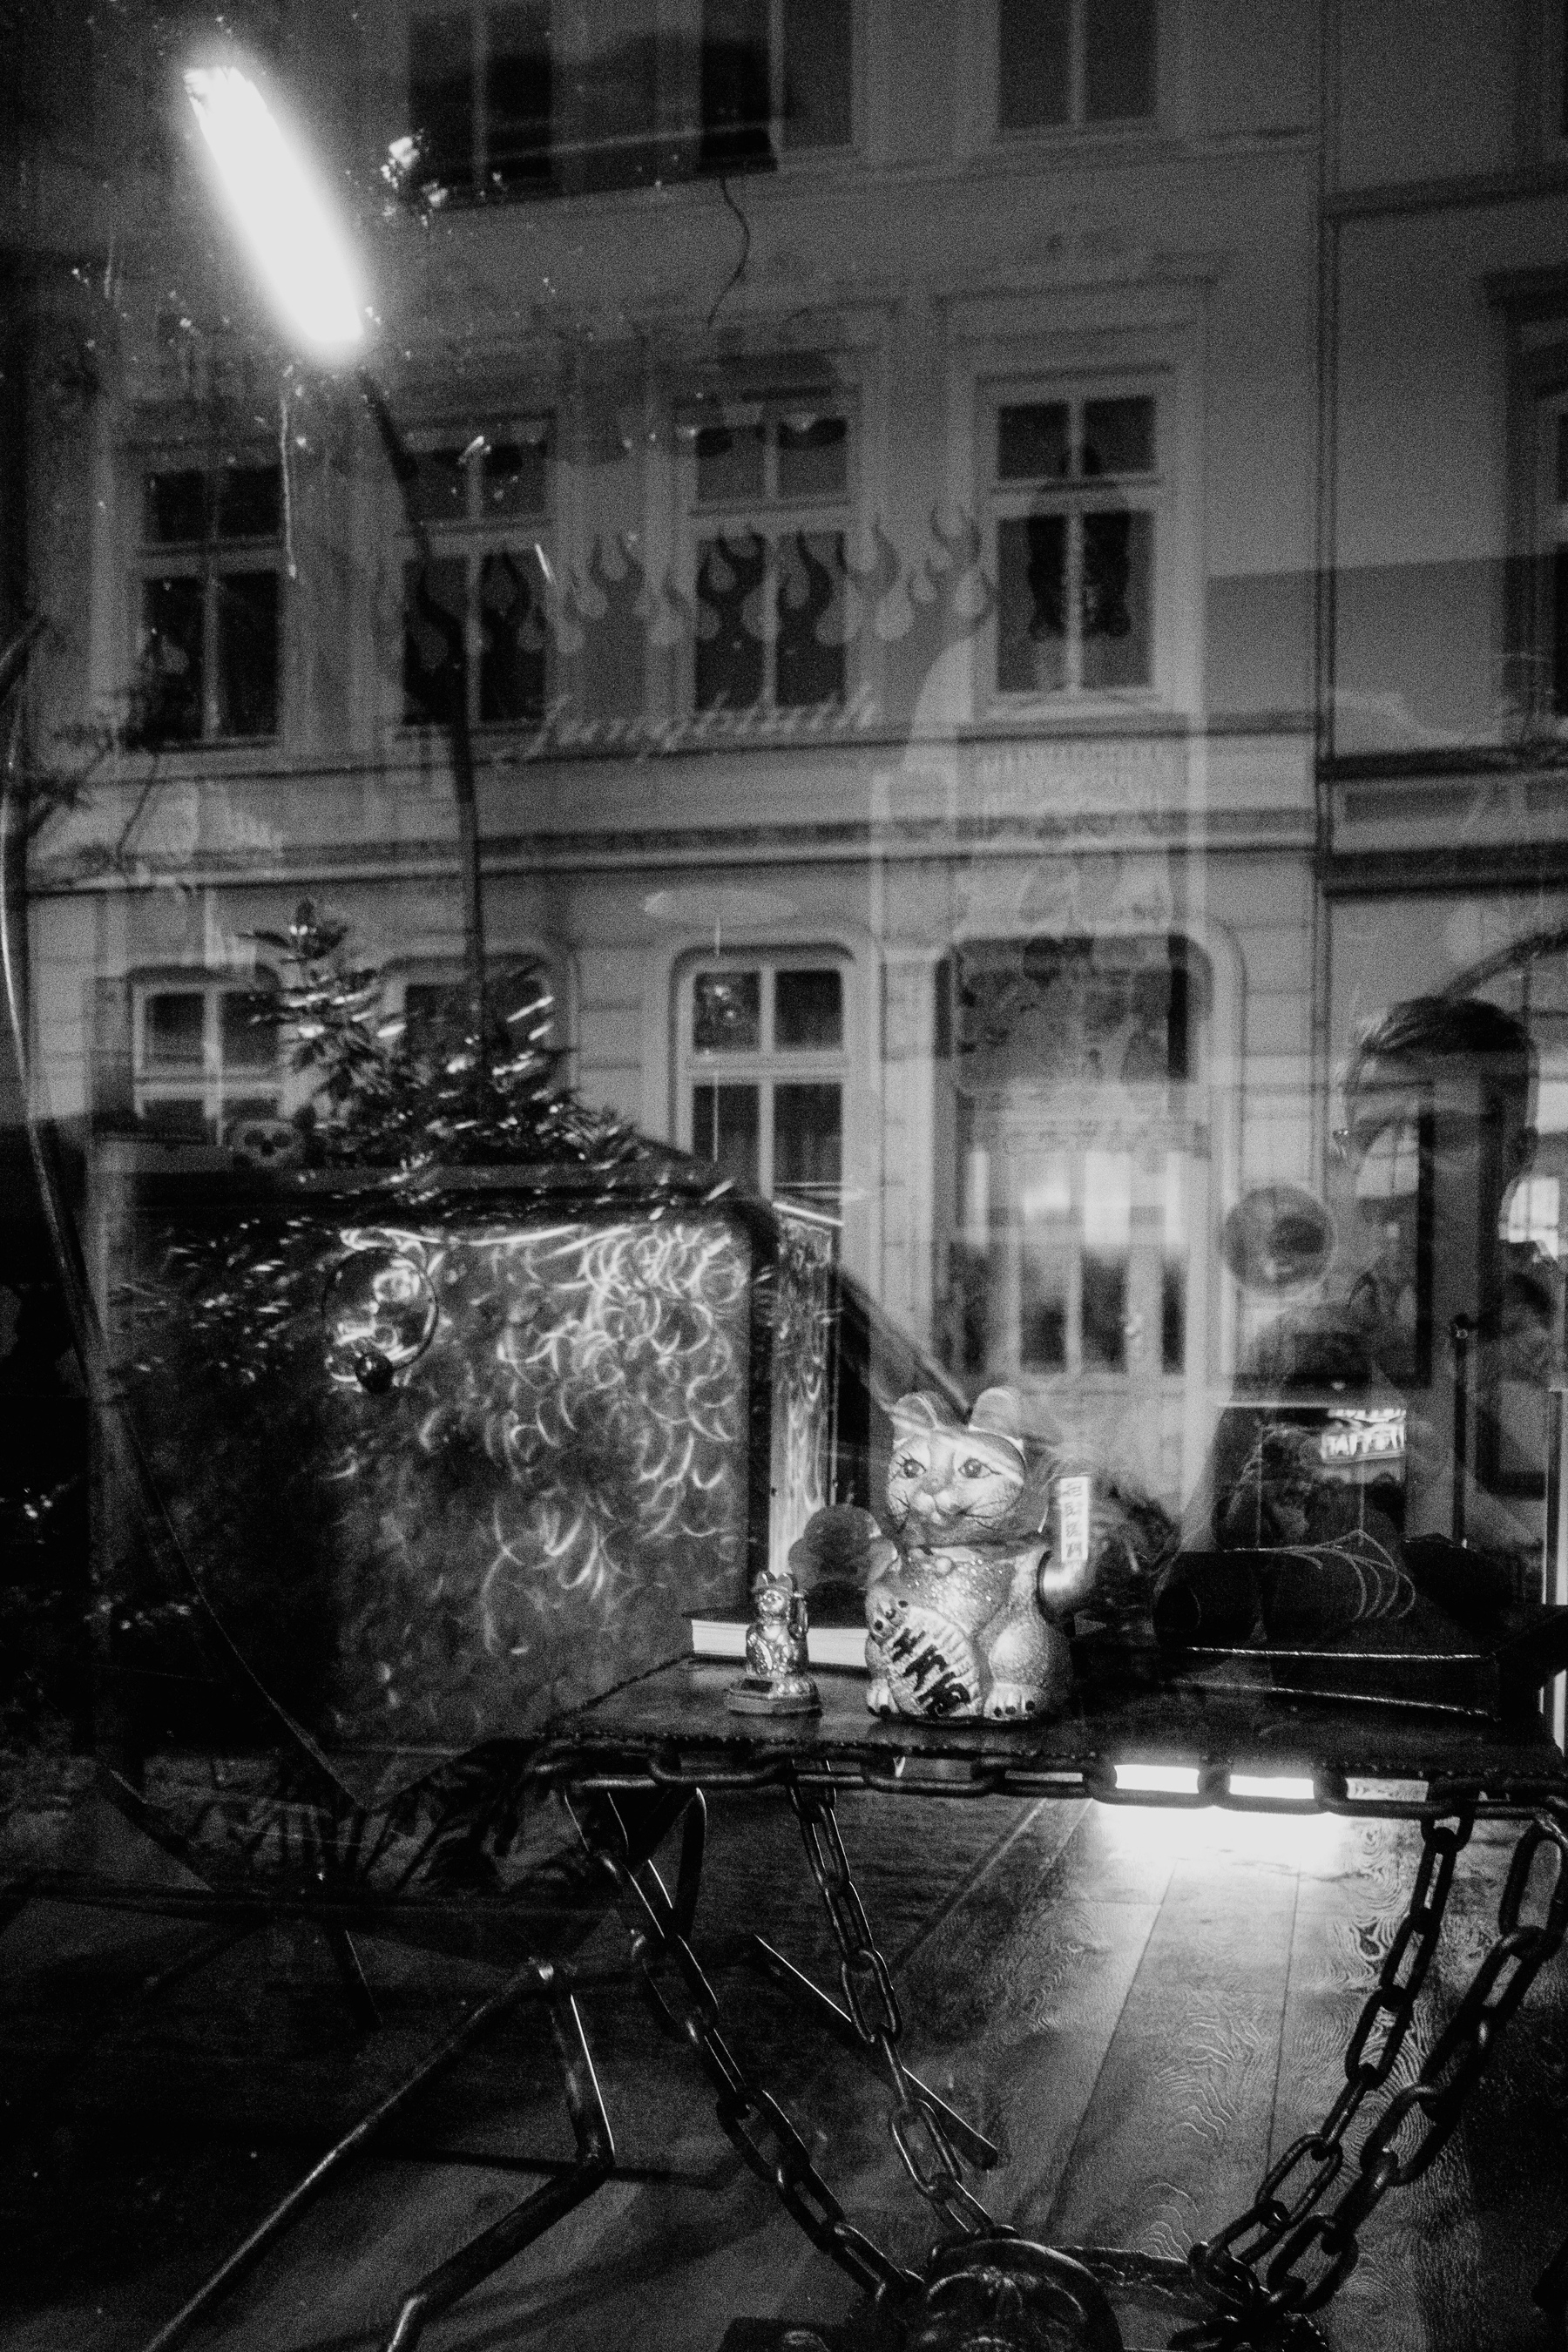 A black-and-white photo capturing a storefront window display that includes a maneki-neko (beckoning cat) statue and other objects, with reflections of a building facade and a person visible in the glass.